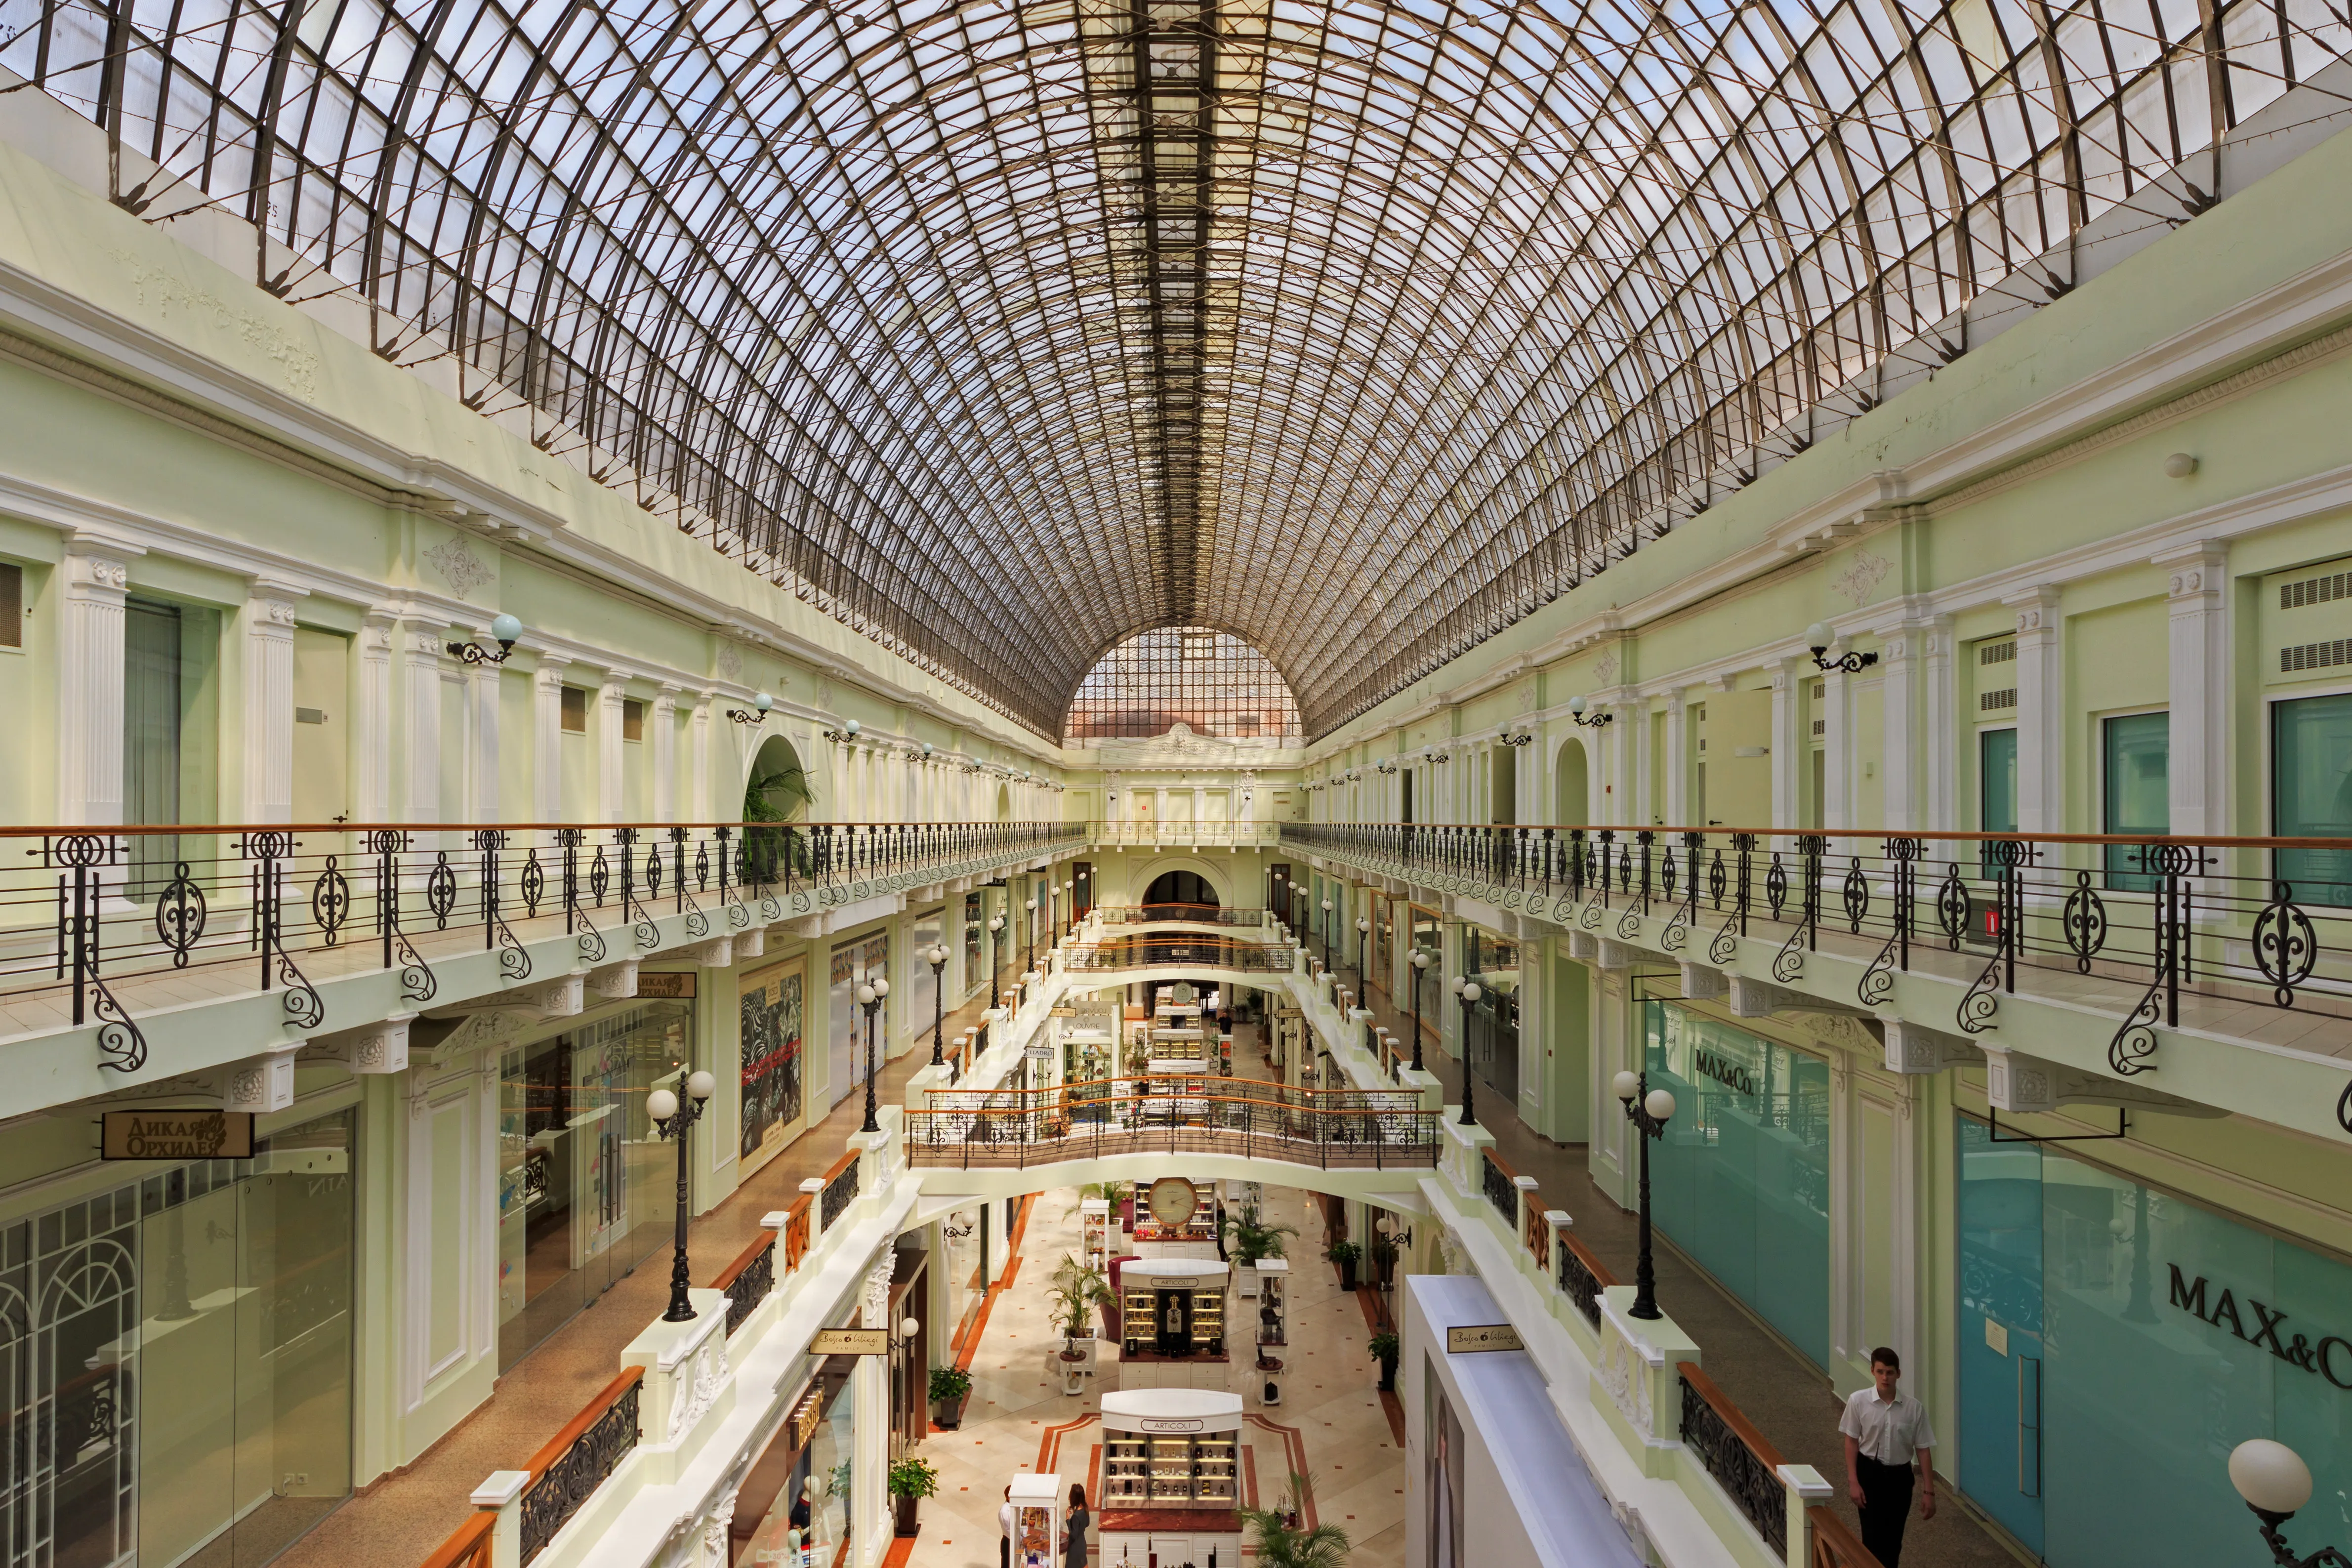 Petrovsky Passage in Russia, europe | Fragrance,Handbags,Shoes,Accessories,Clothes,Jewelry - Country Helper